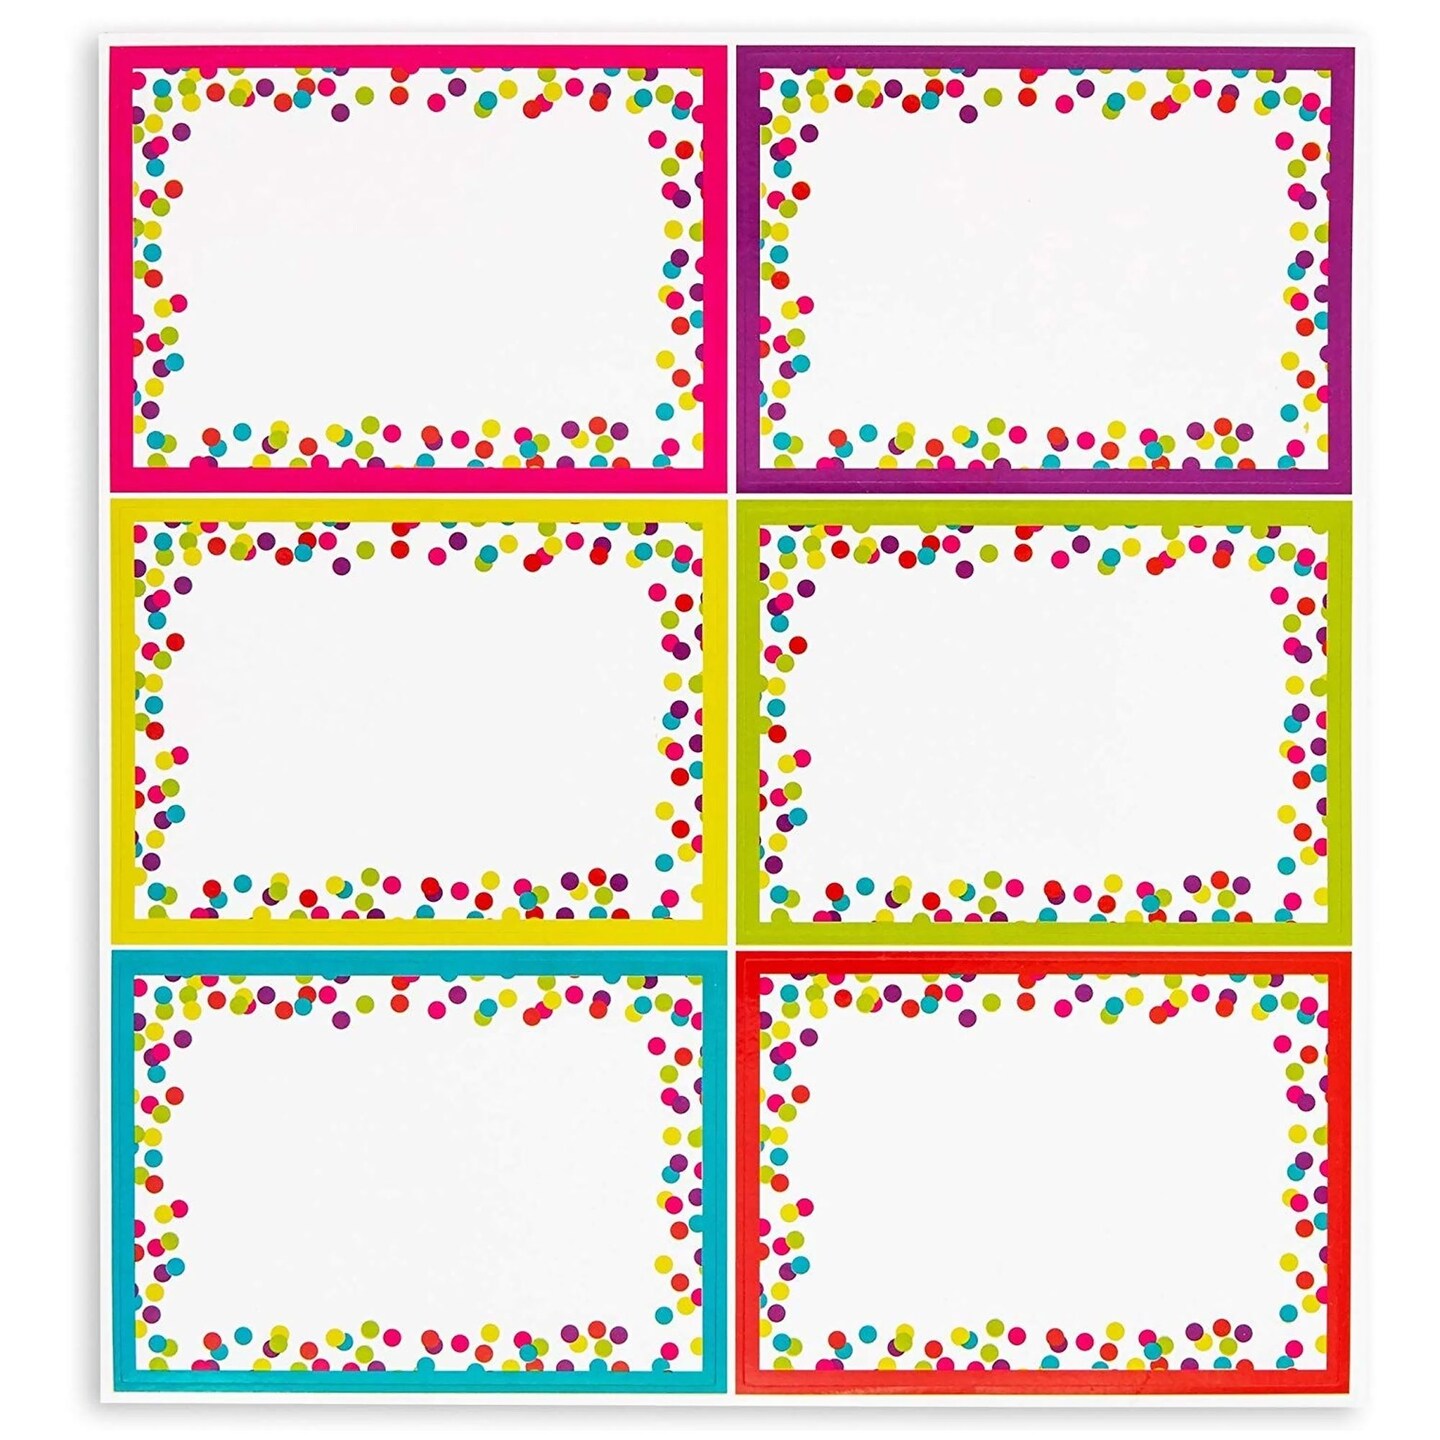 144 Pieces Decorative Colorful Name Tags for Classroom &#x2013; Blank Stickers to Write on for Student Desks, Bin Labels, Teacher Supplies, 6 Designs (3.5 x 2.5 Inches)